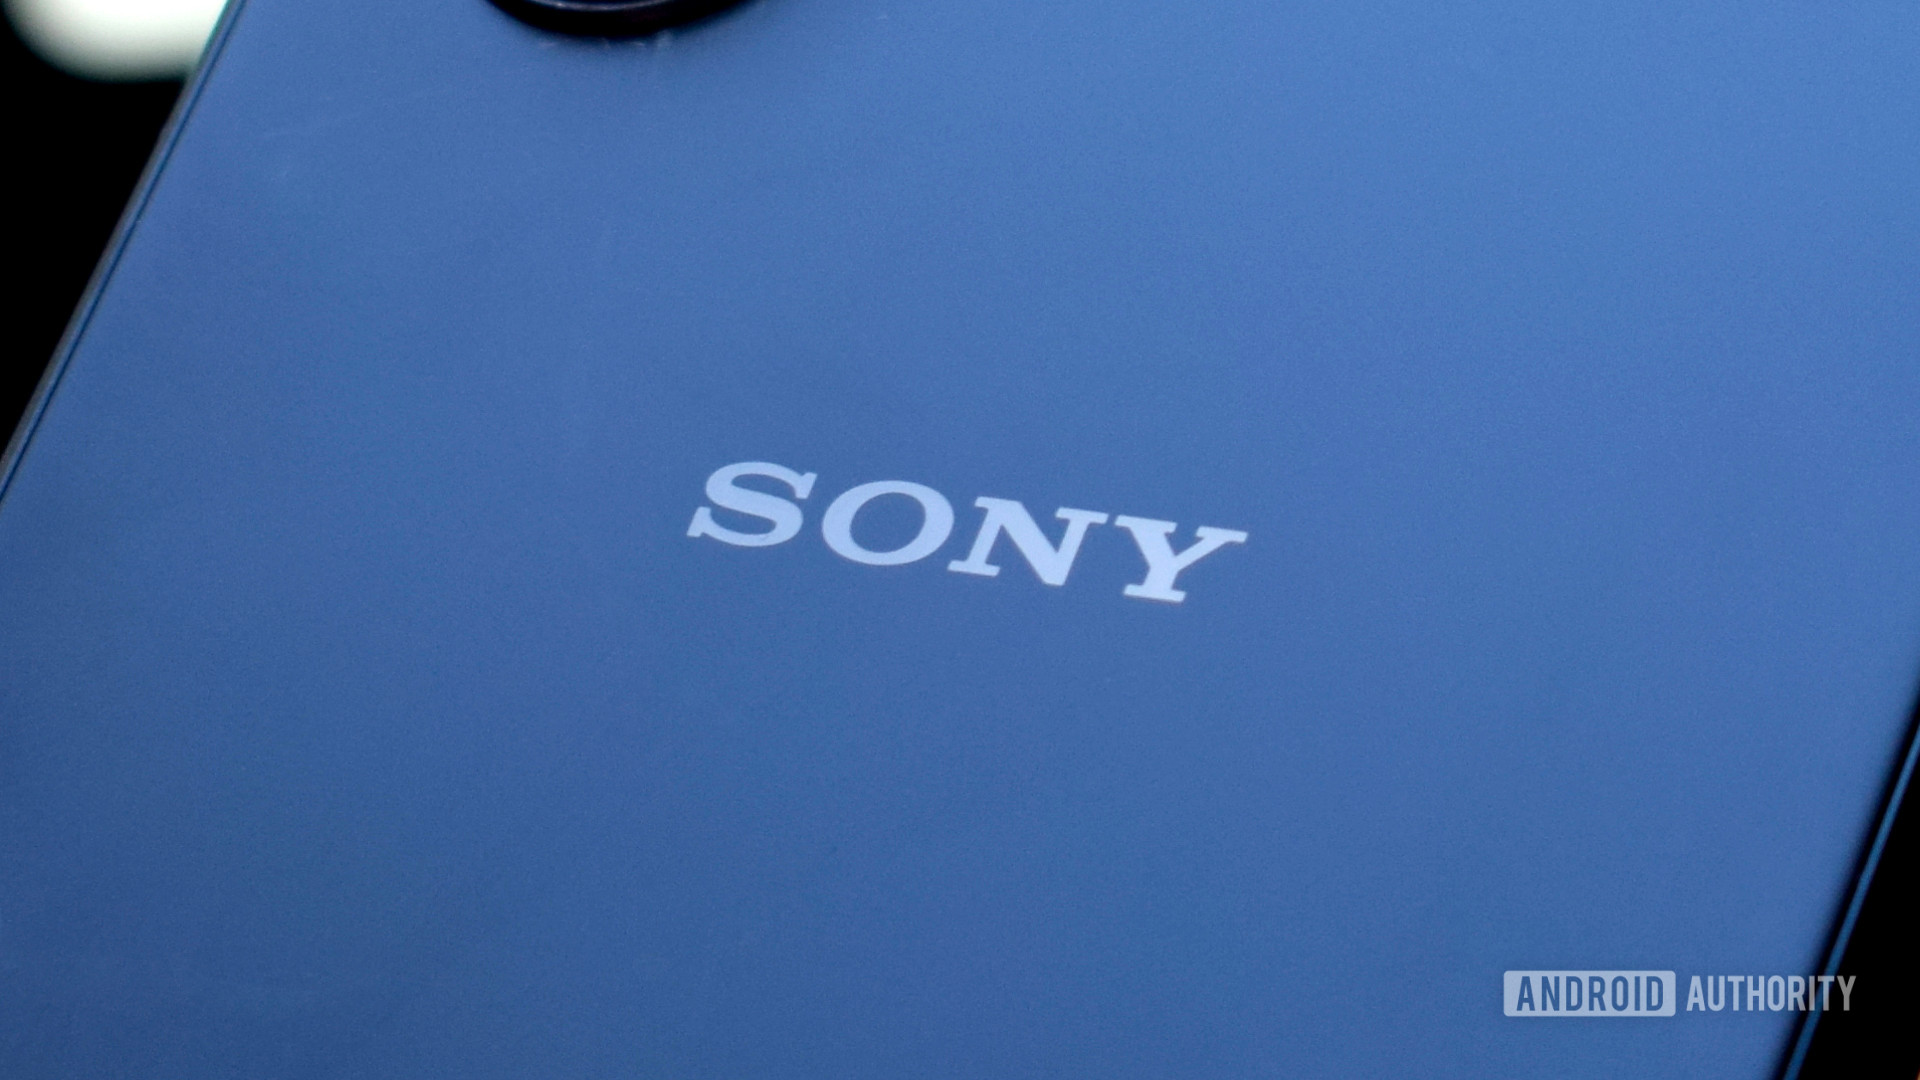 Sony logo from back of Xperia smartphone up close